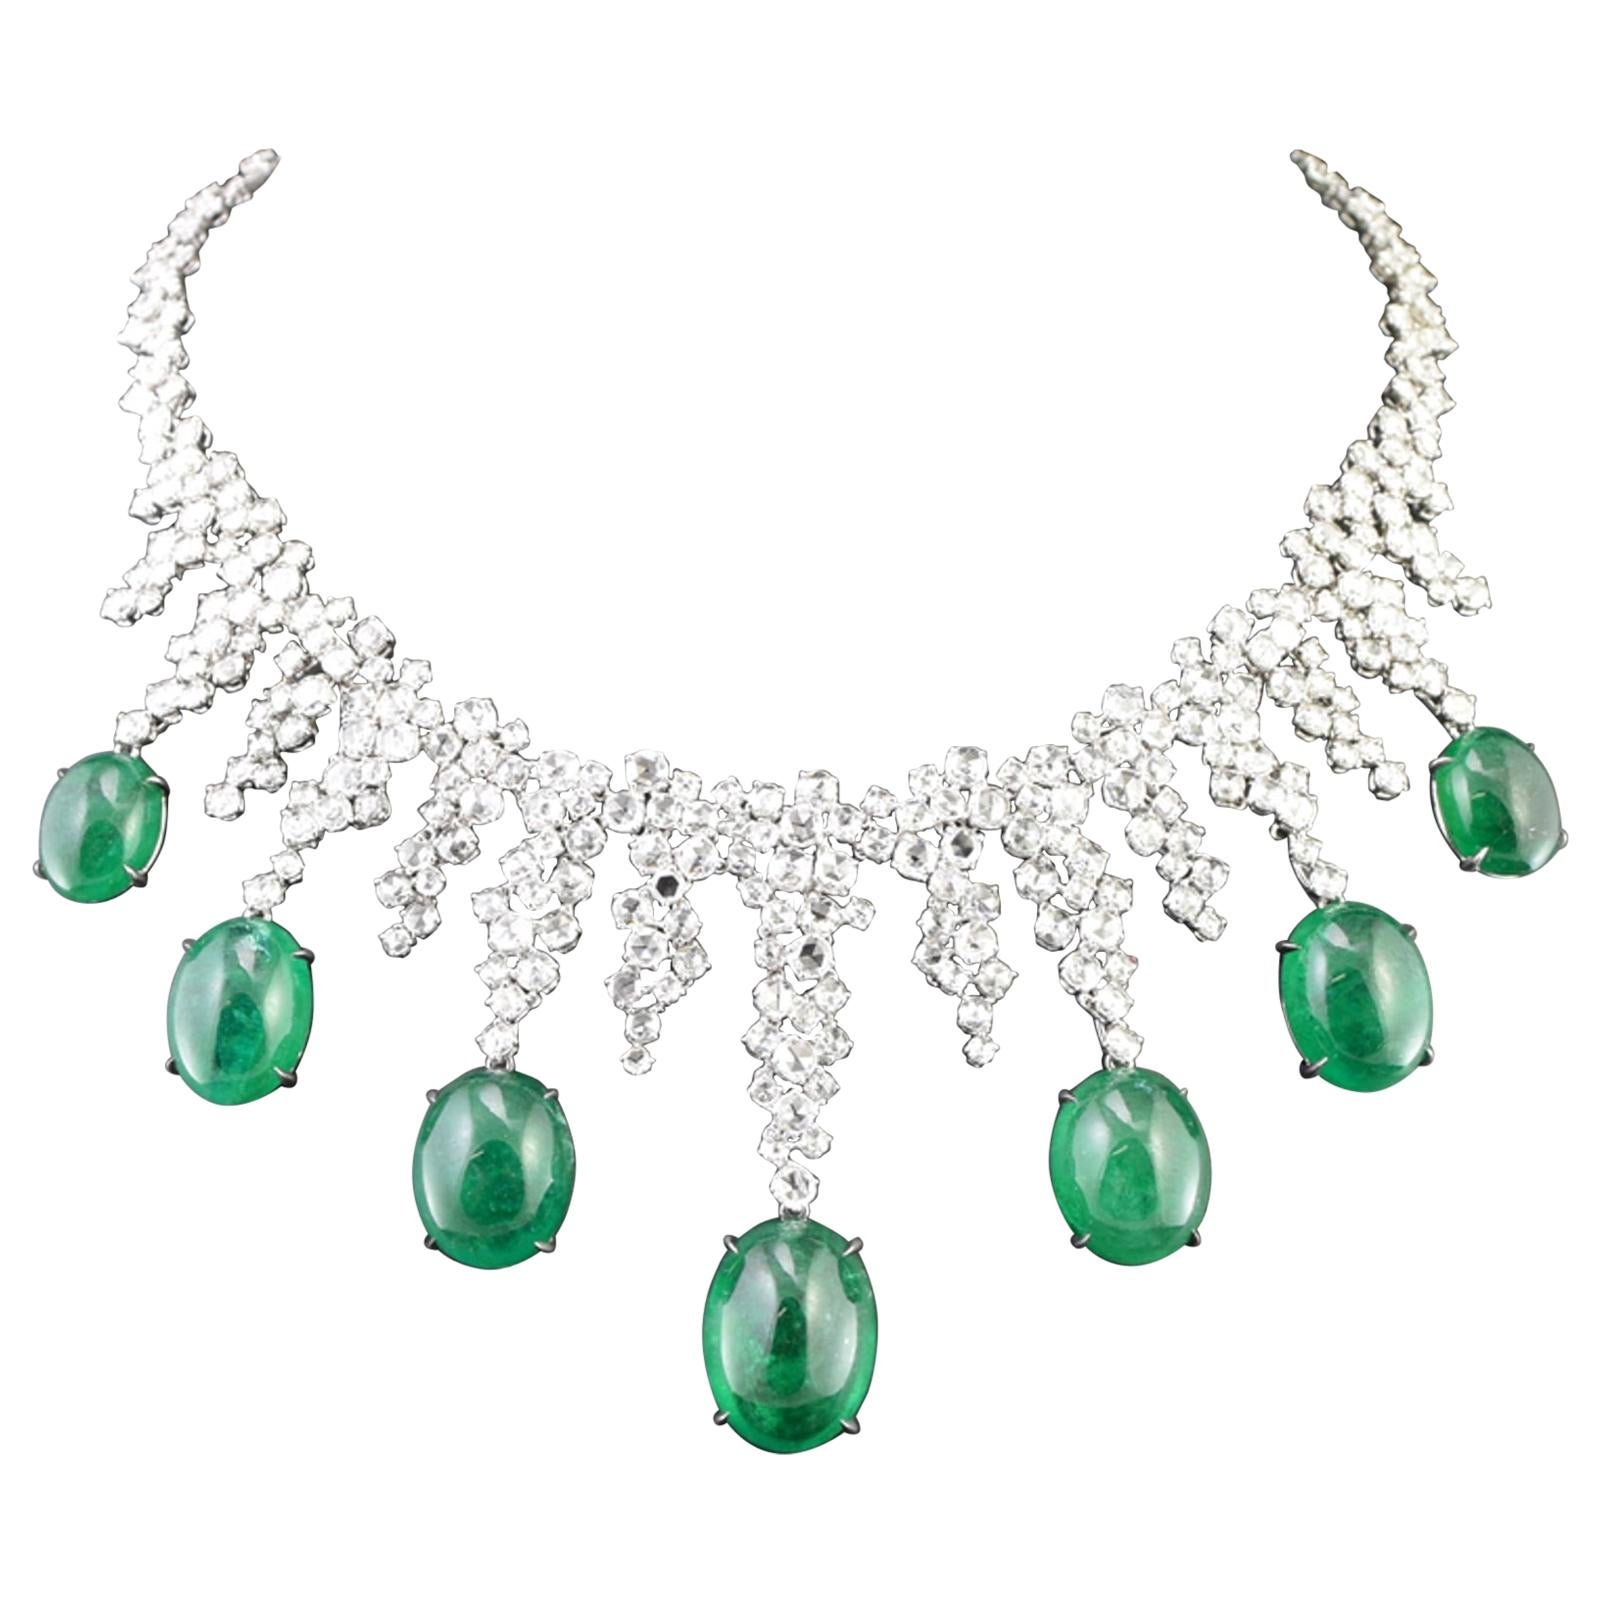 18 Karat White Gold Diamond and Cabochon Emerald "Icecicle" Necklace For Sale